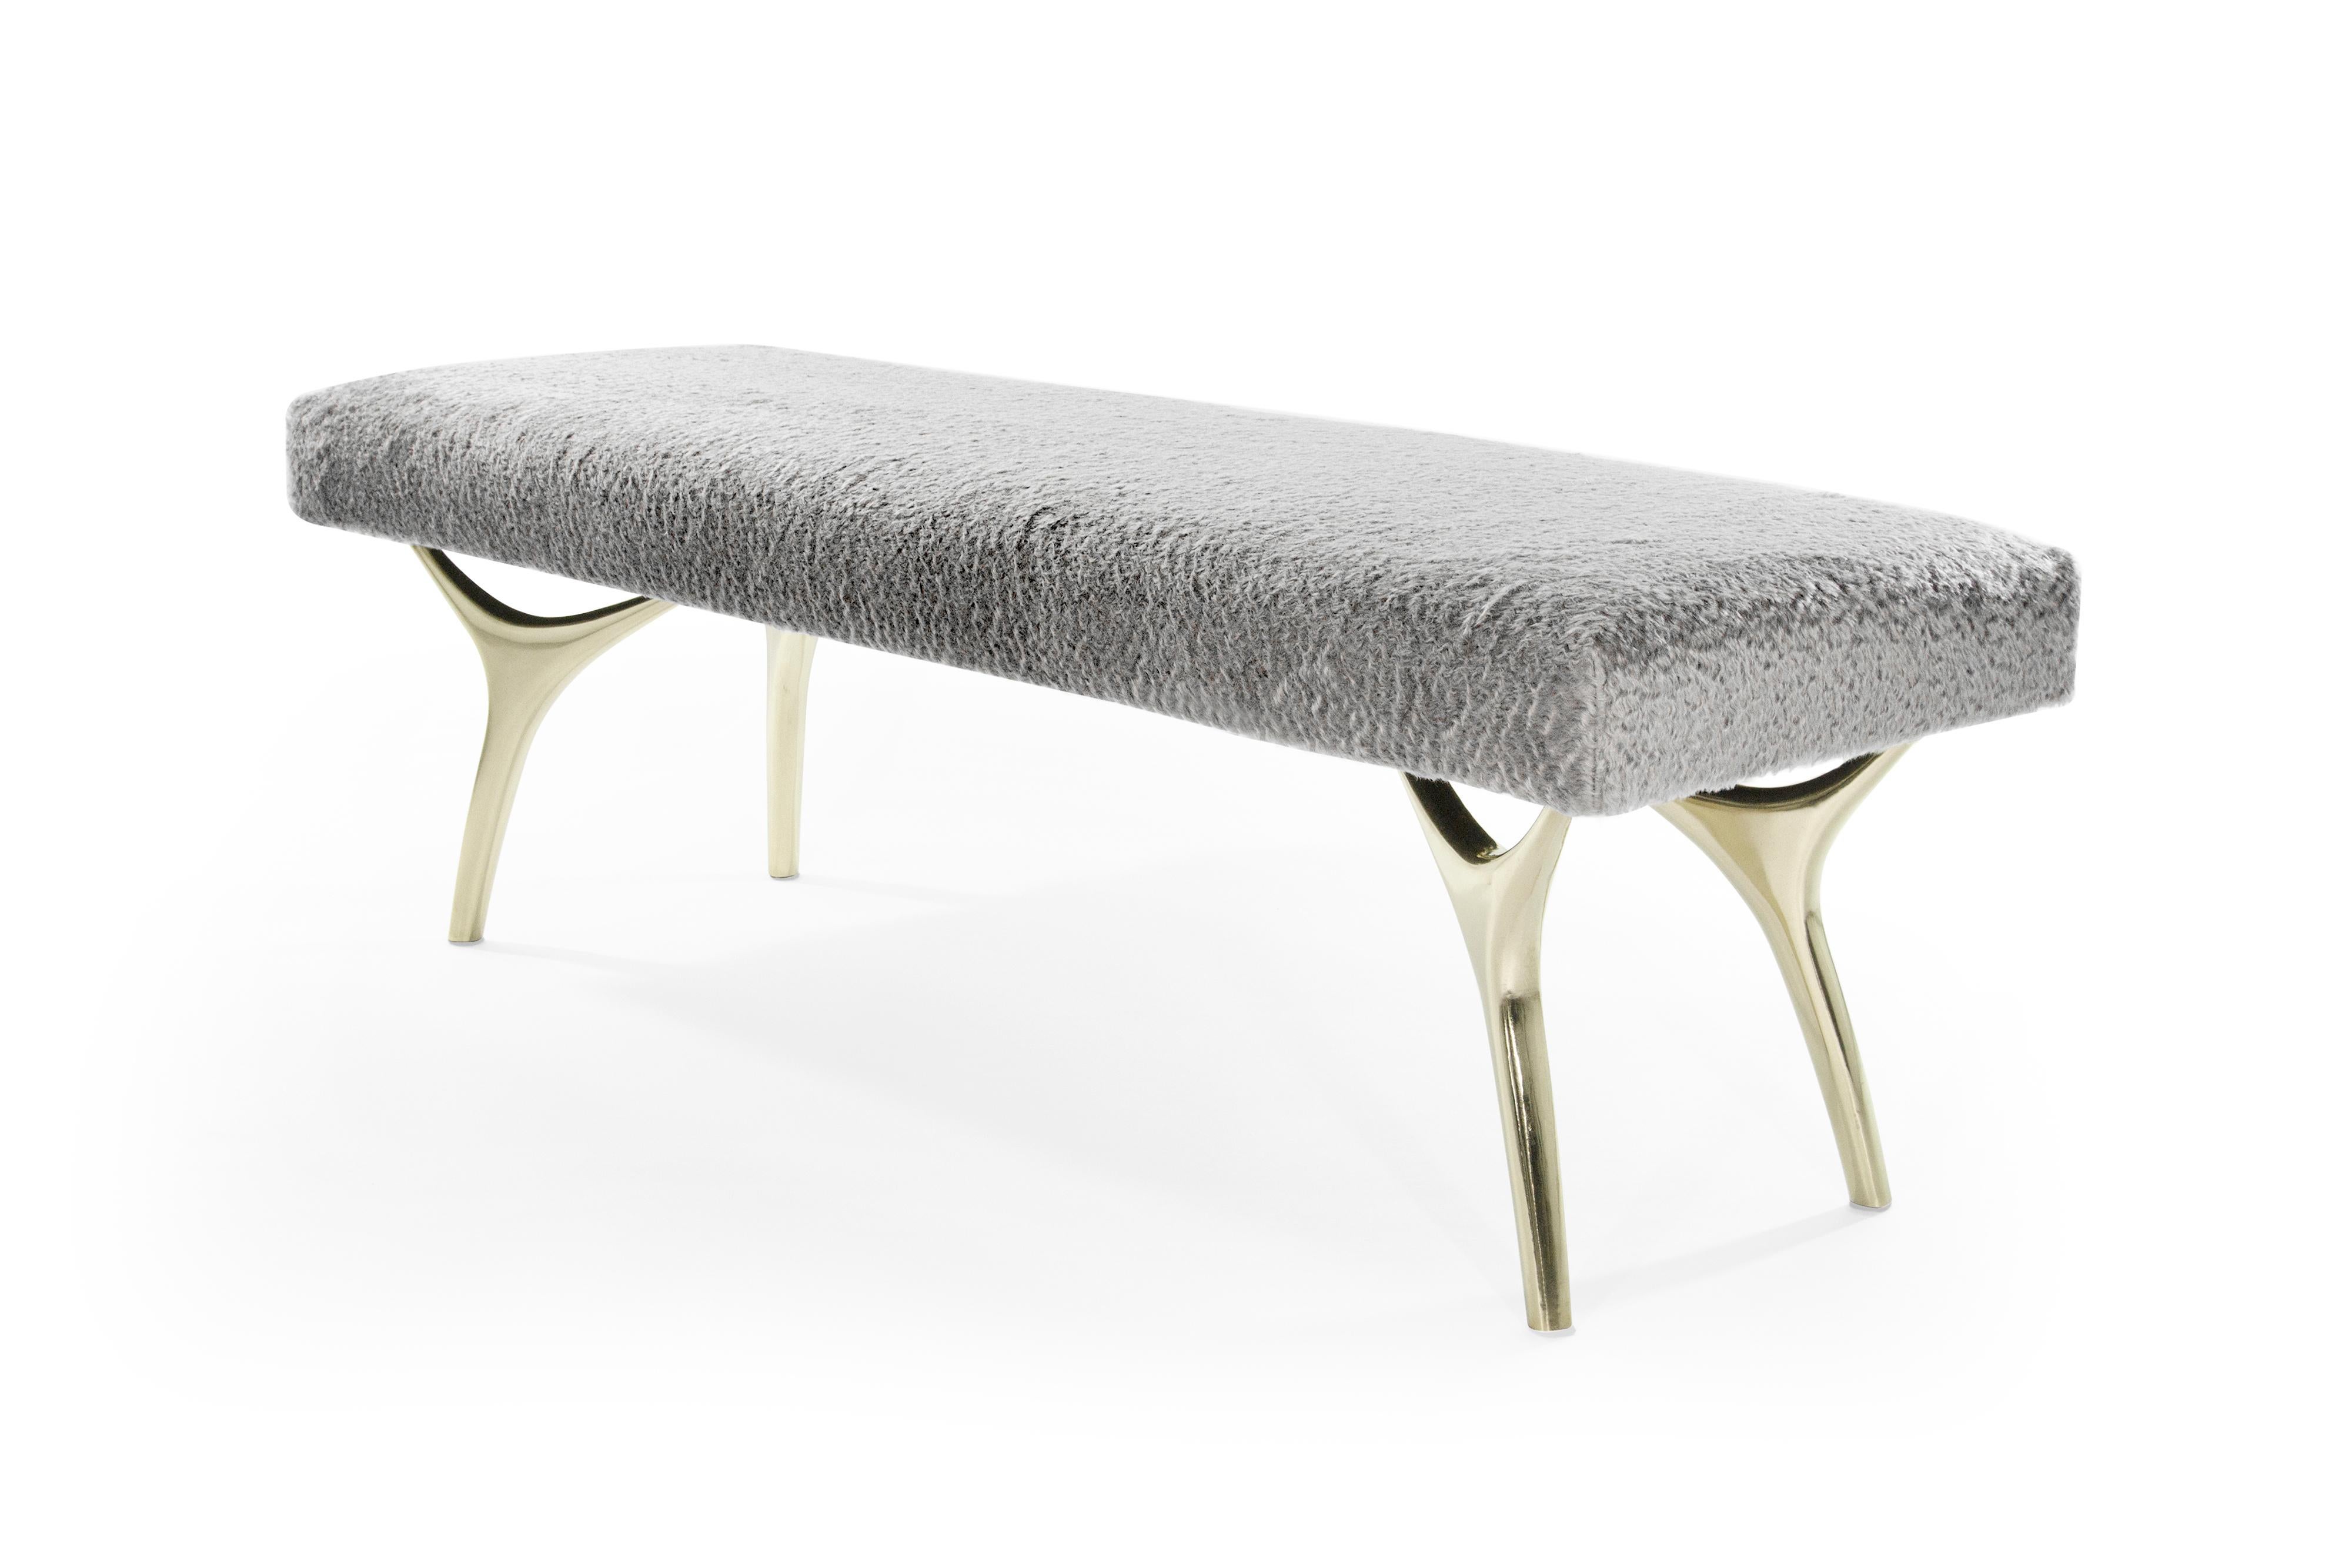 The Crescent Bench floats effortlessly, poised on brass fingertips. Inspired by 20th-century visionaries like Vladimir Kagan and Gio Ponti, this bench offers a unique perspective. The plush bench cushion is fully wrapped in soft silver mohair